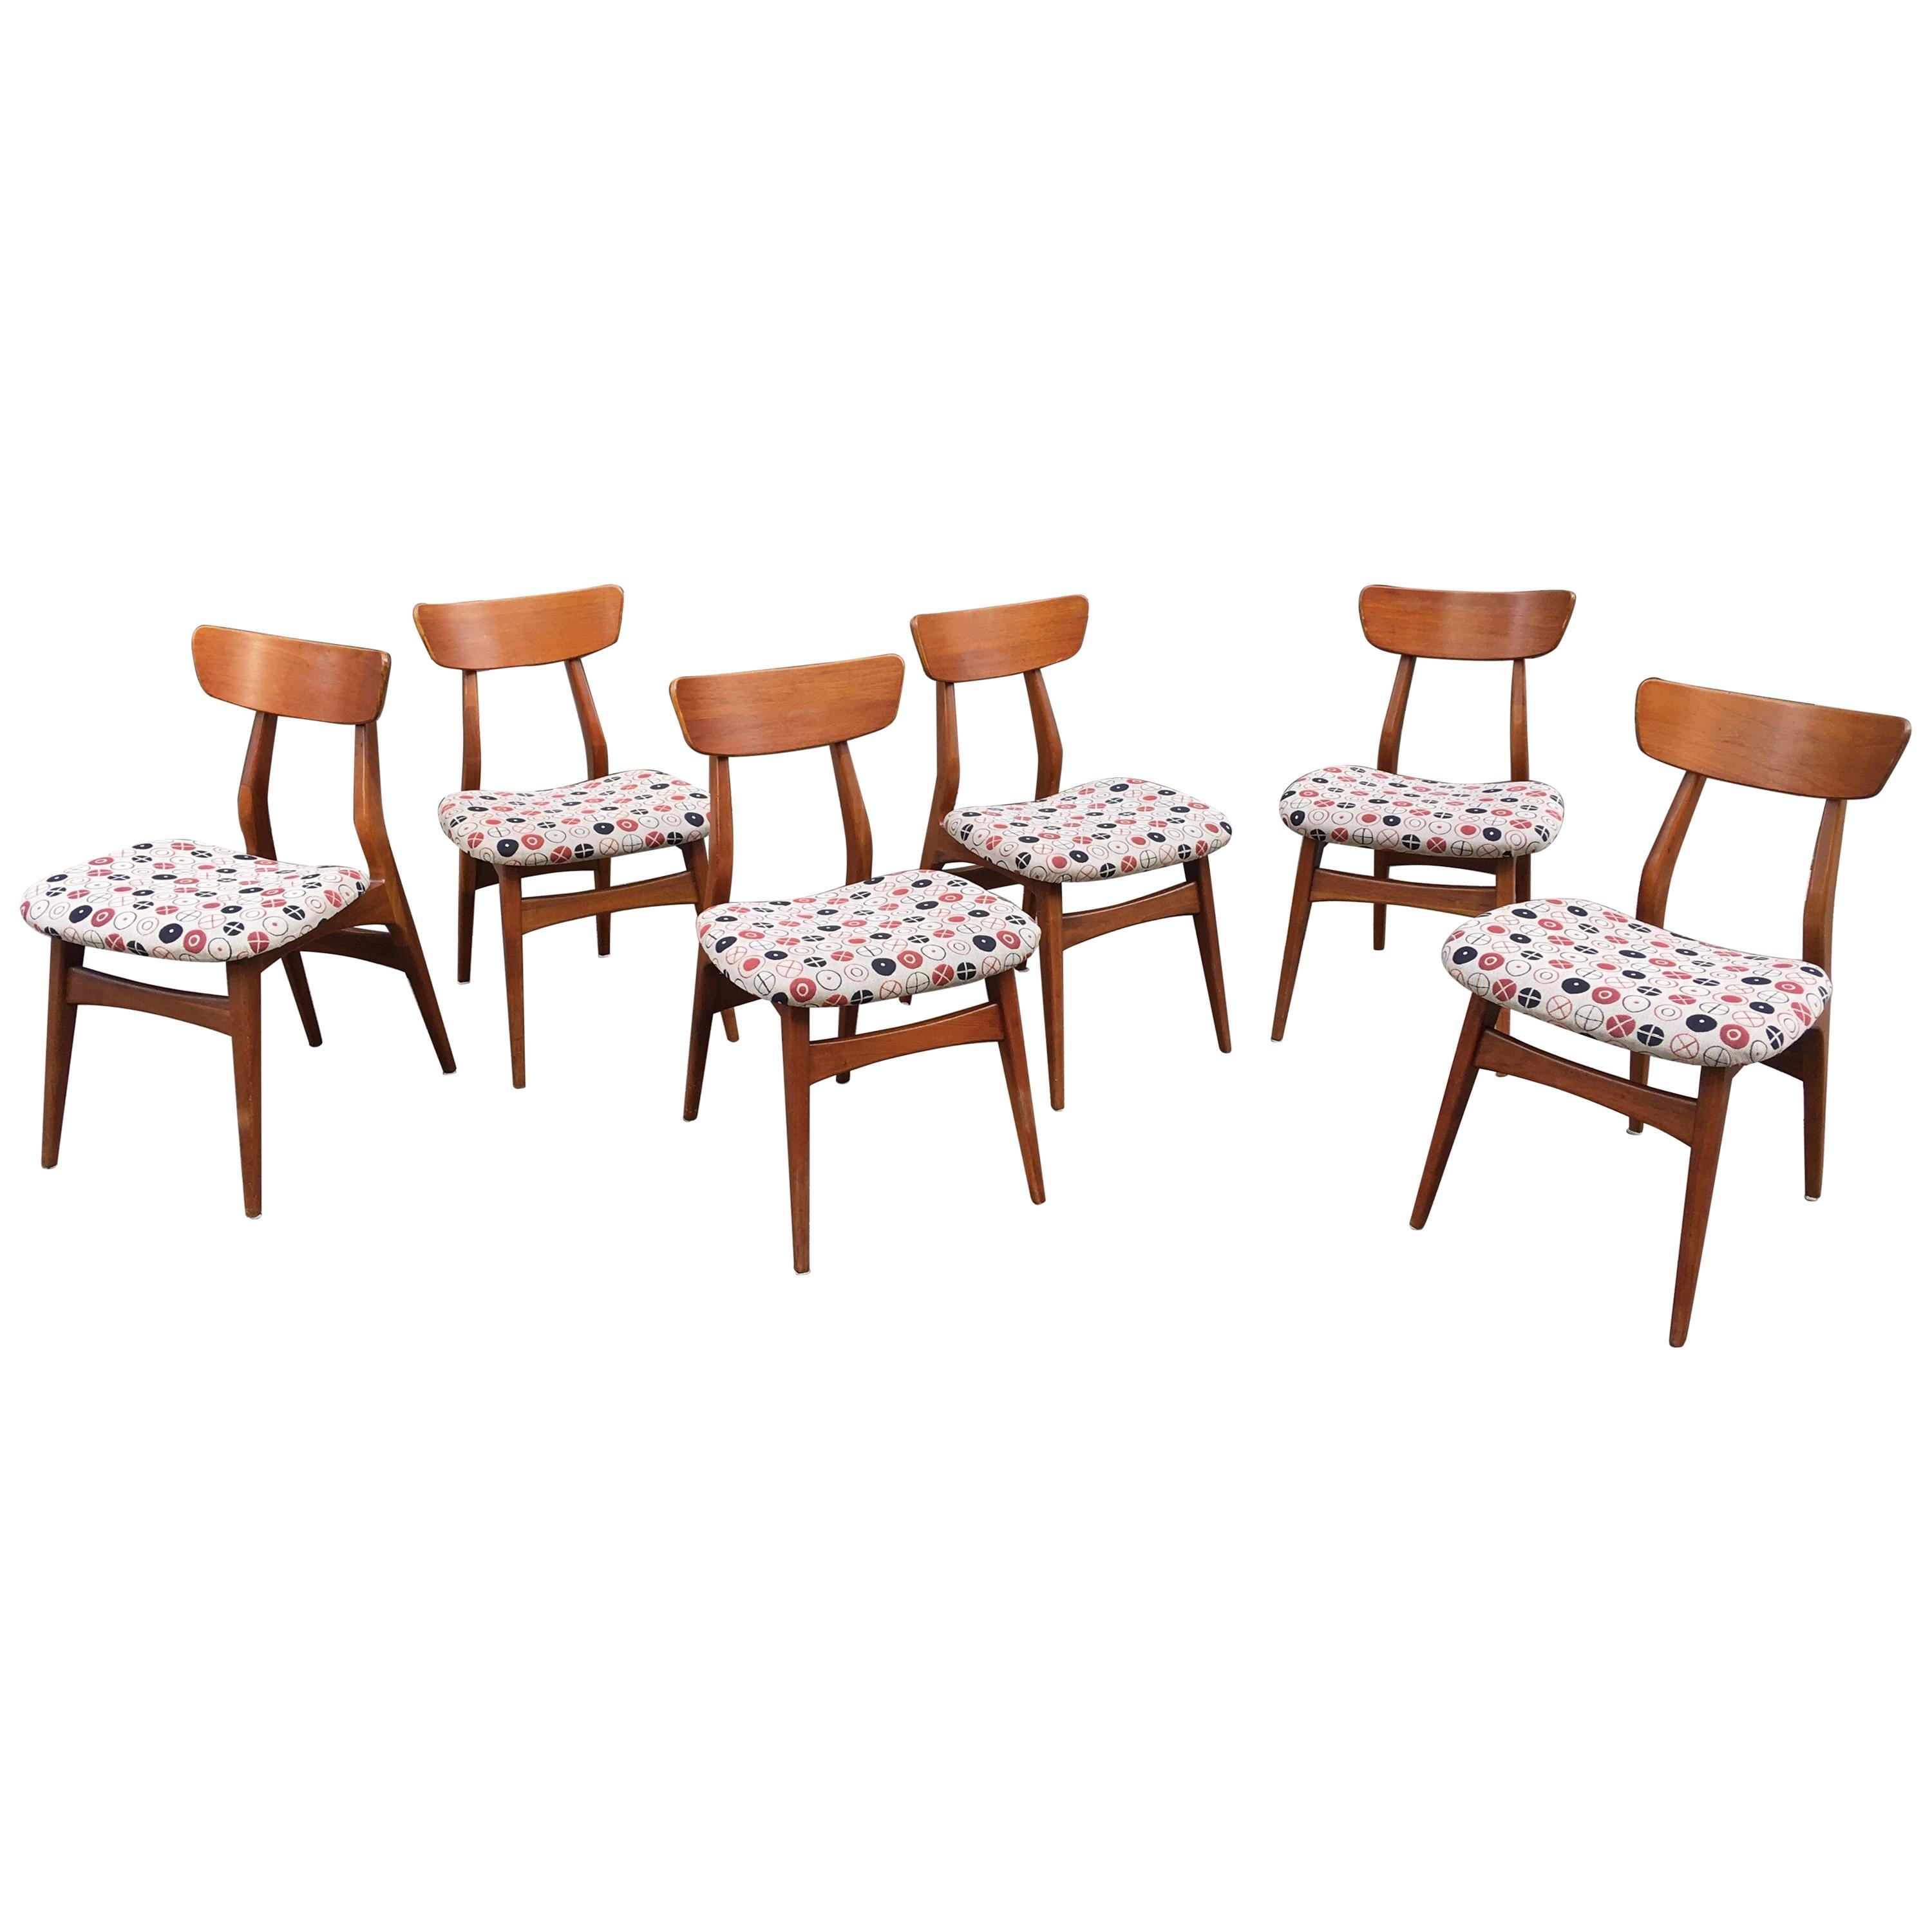 George Nelson for Herman Miller Set of 6 Dining Chairs